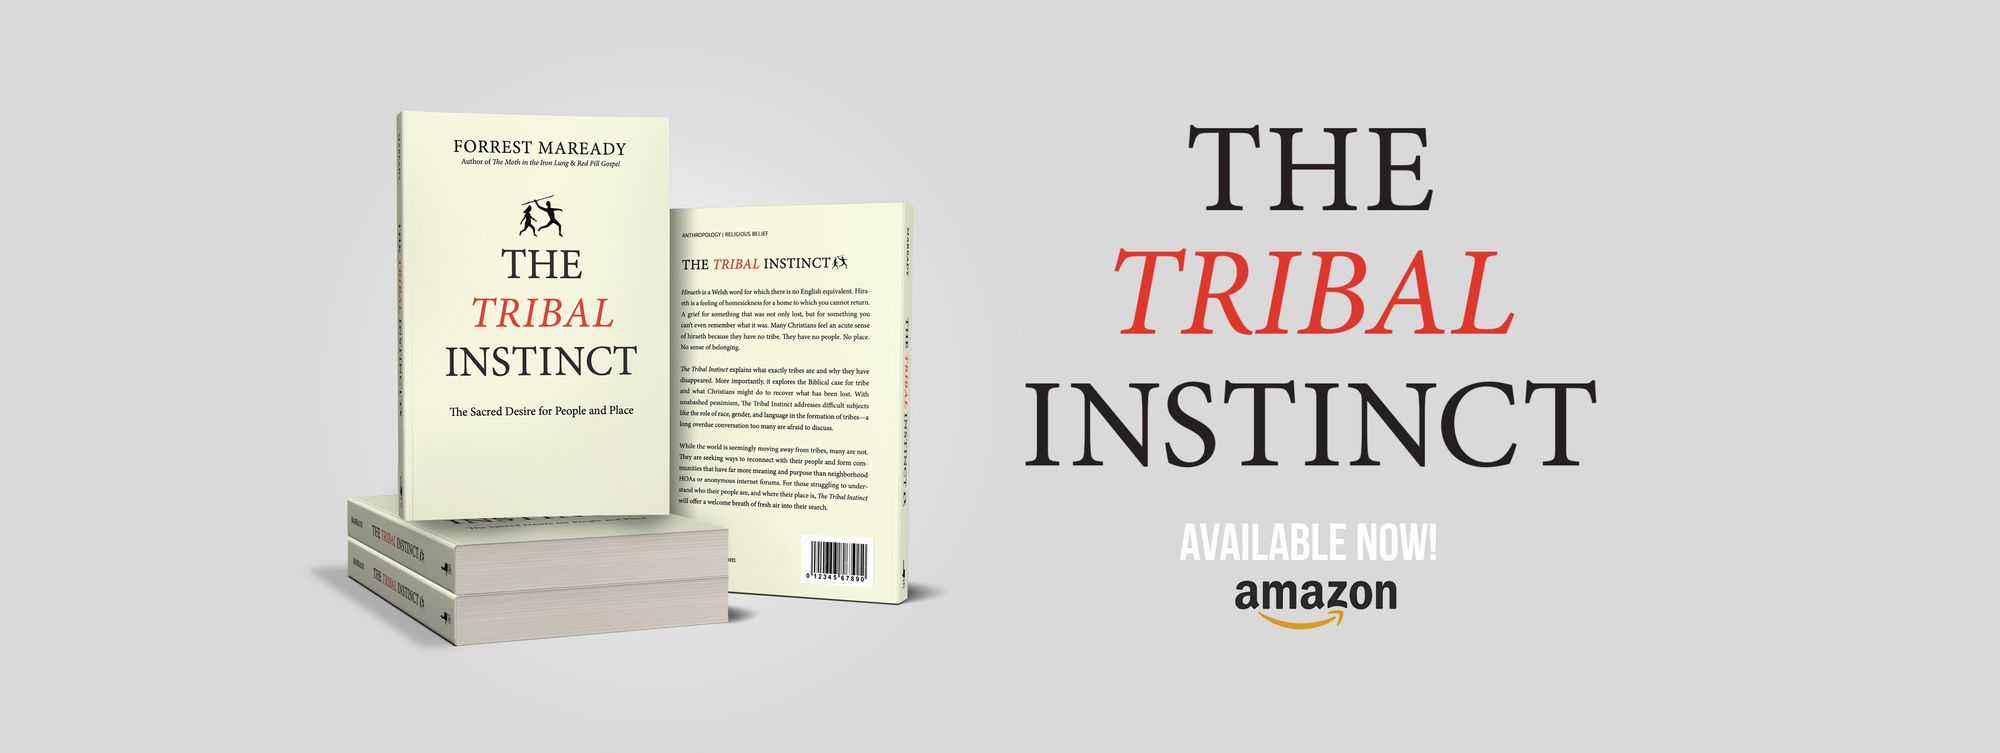 The Tribal Instinct: New Book, Available Now